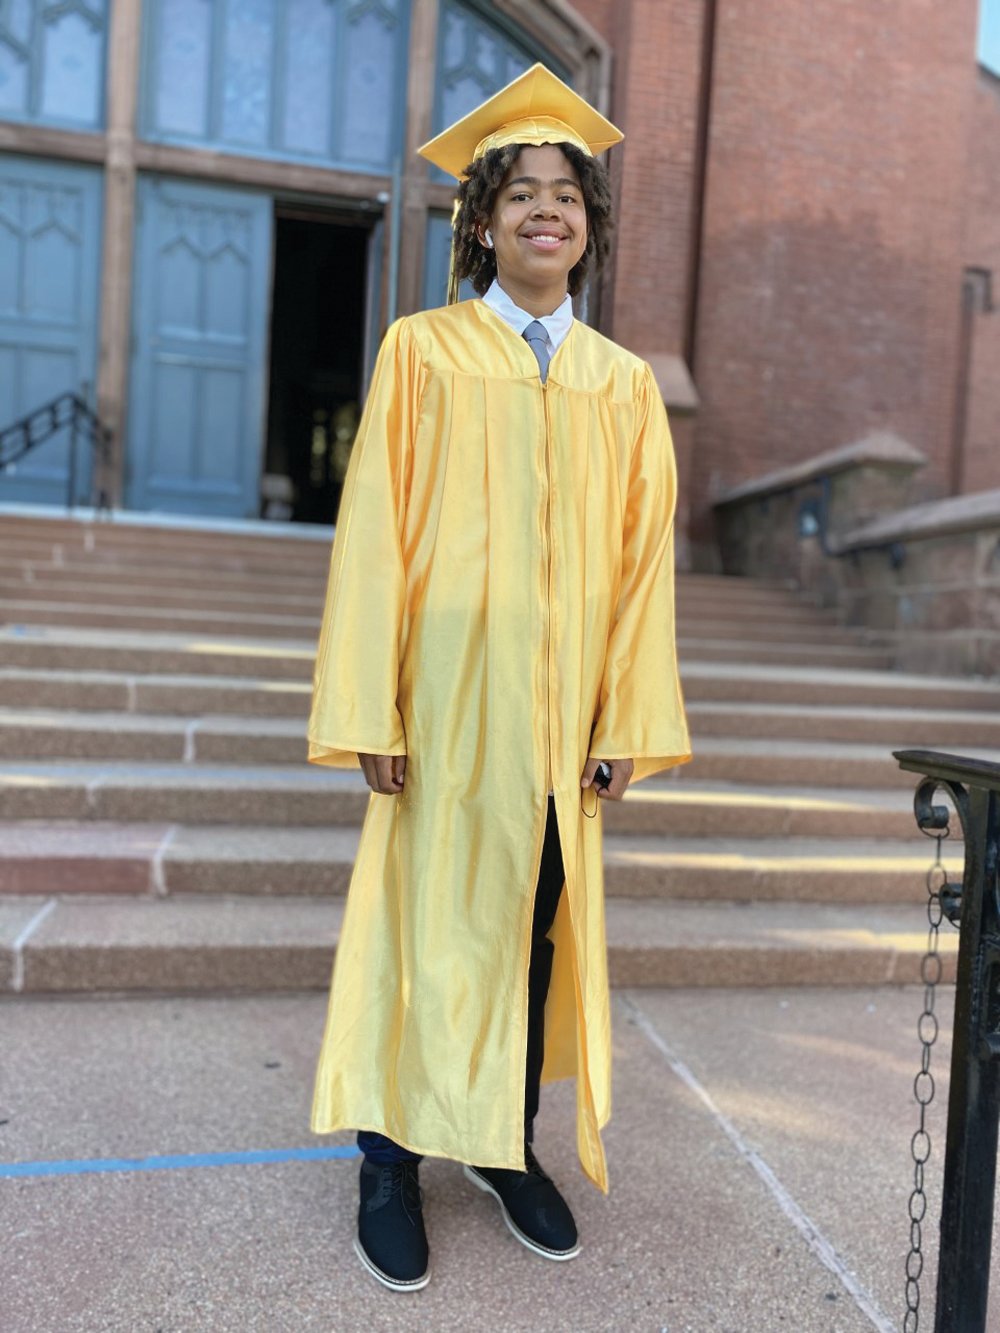 EDUCATION SUCCESS: Sandra Olivo Peterson’s son, Darien, participated in school choice where he attended Bishop McVinney School in Providence.